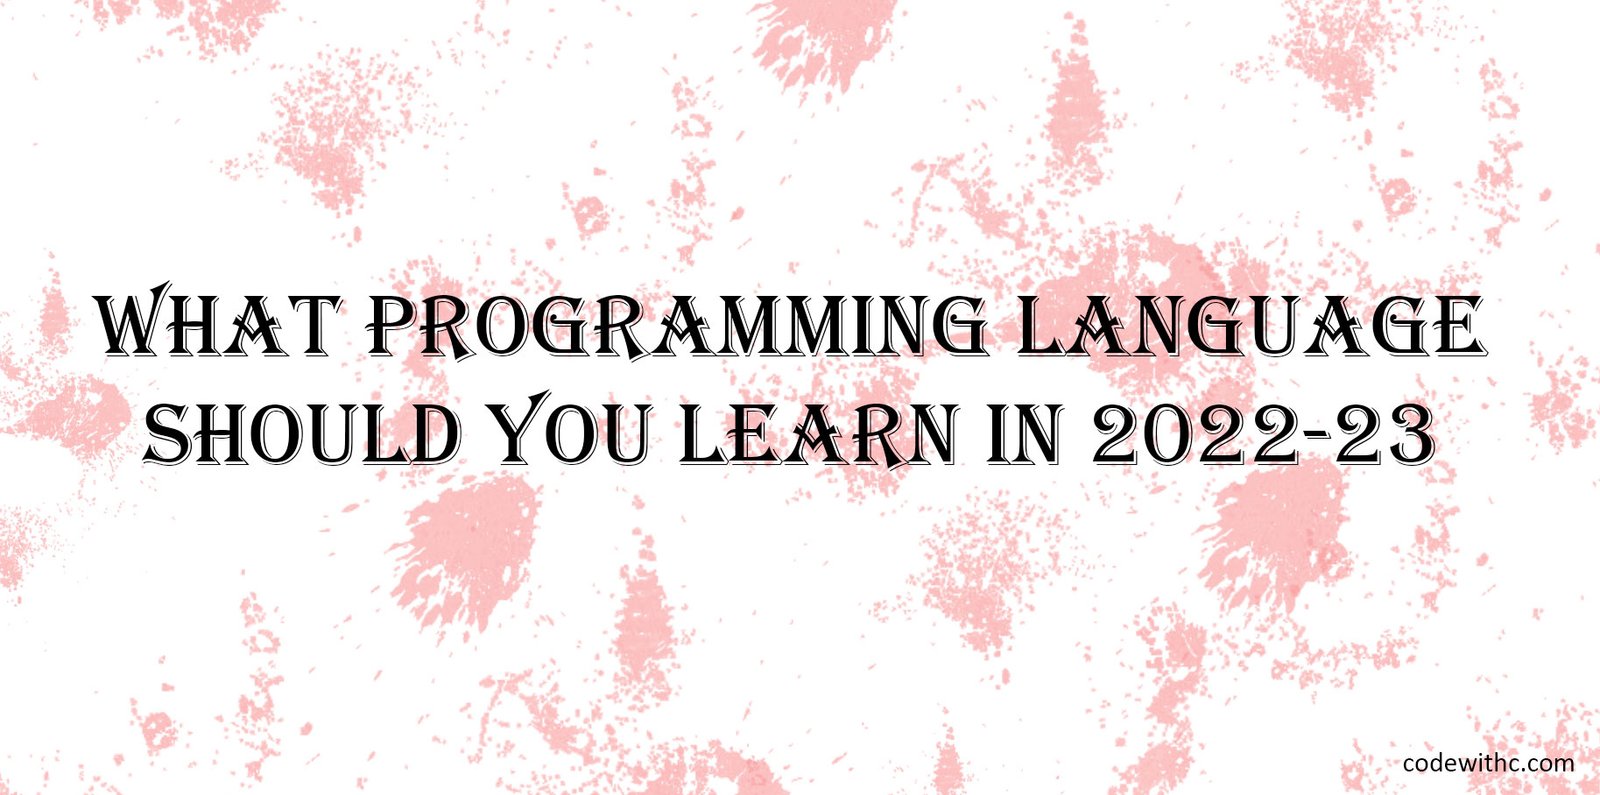 What-programming-language-should-you-learn-in-2022-23